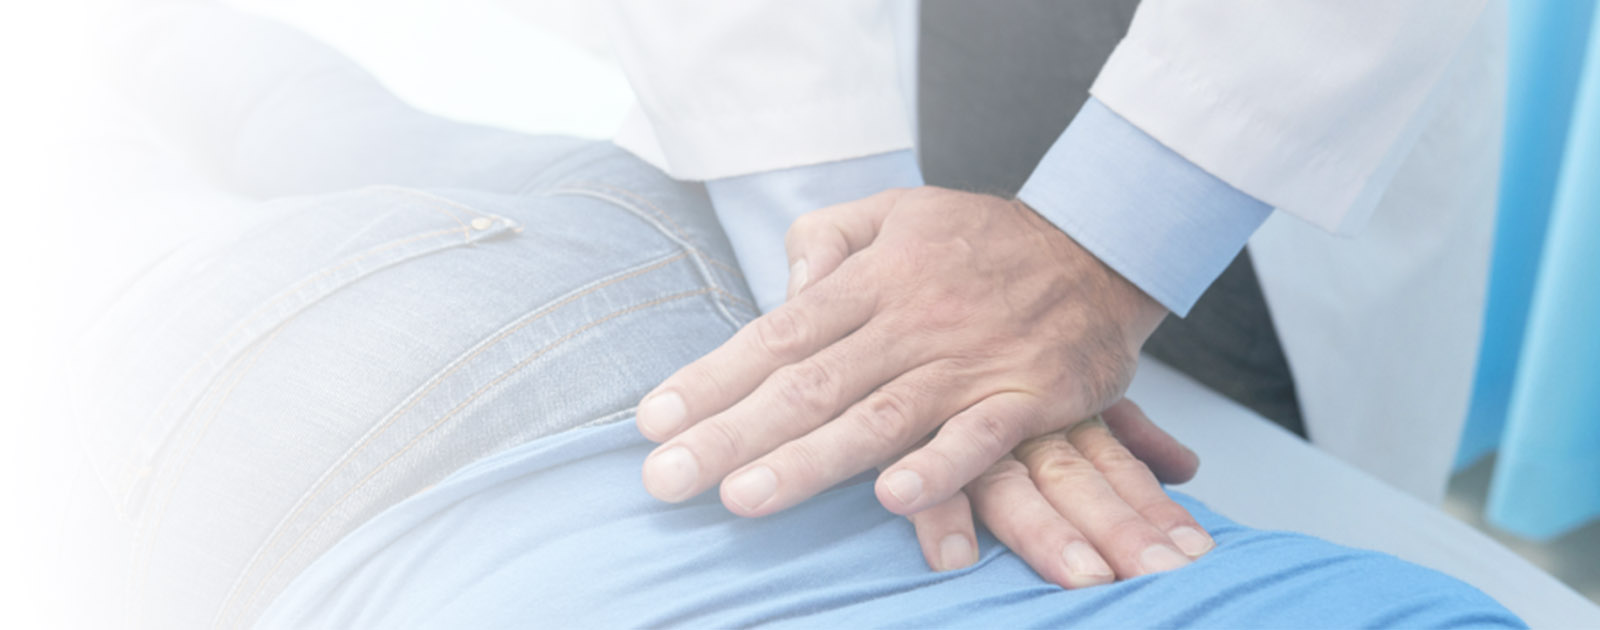 Personal Injury Chiropractic Care | People's Best Care